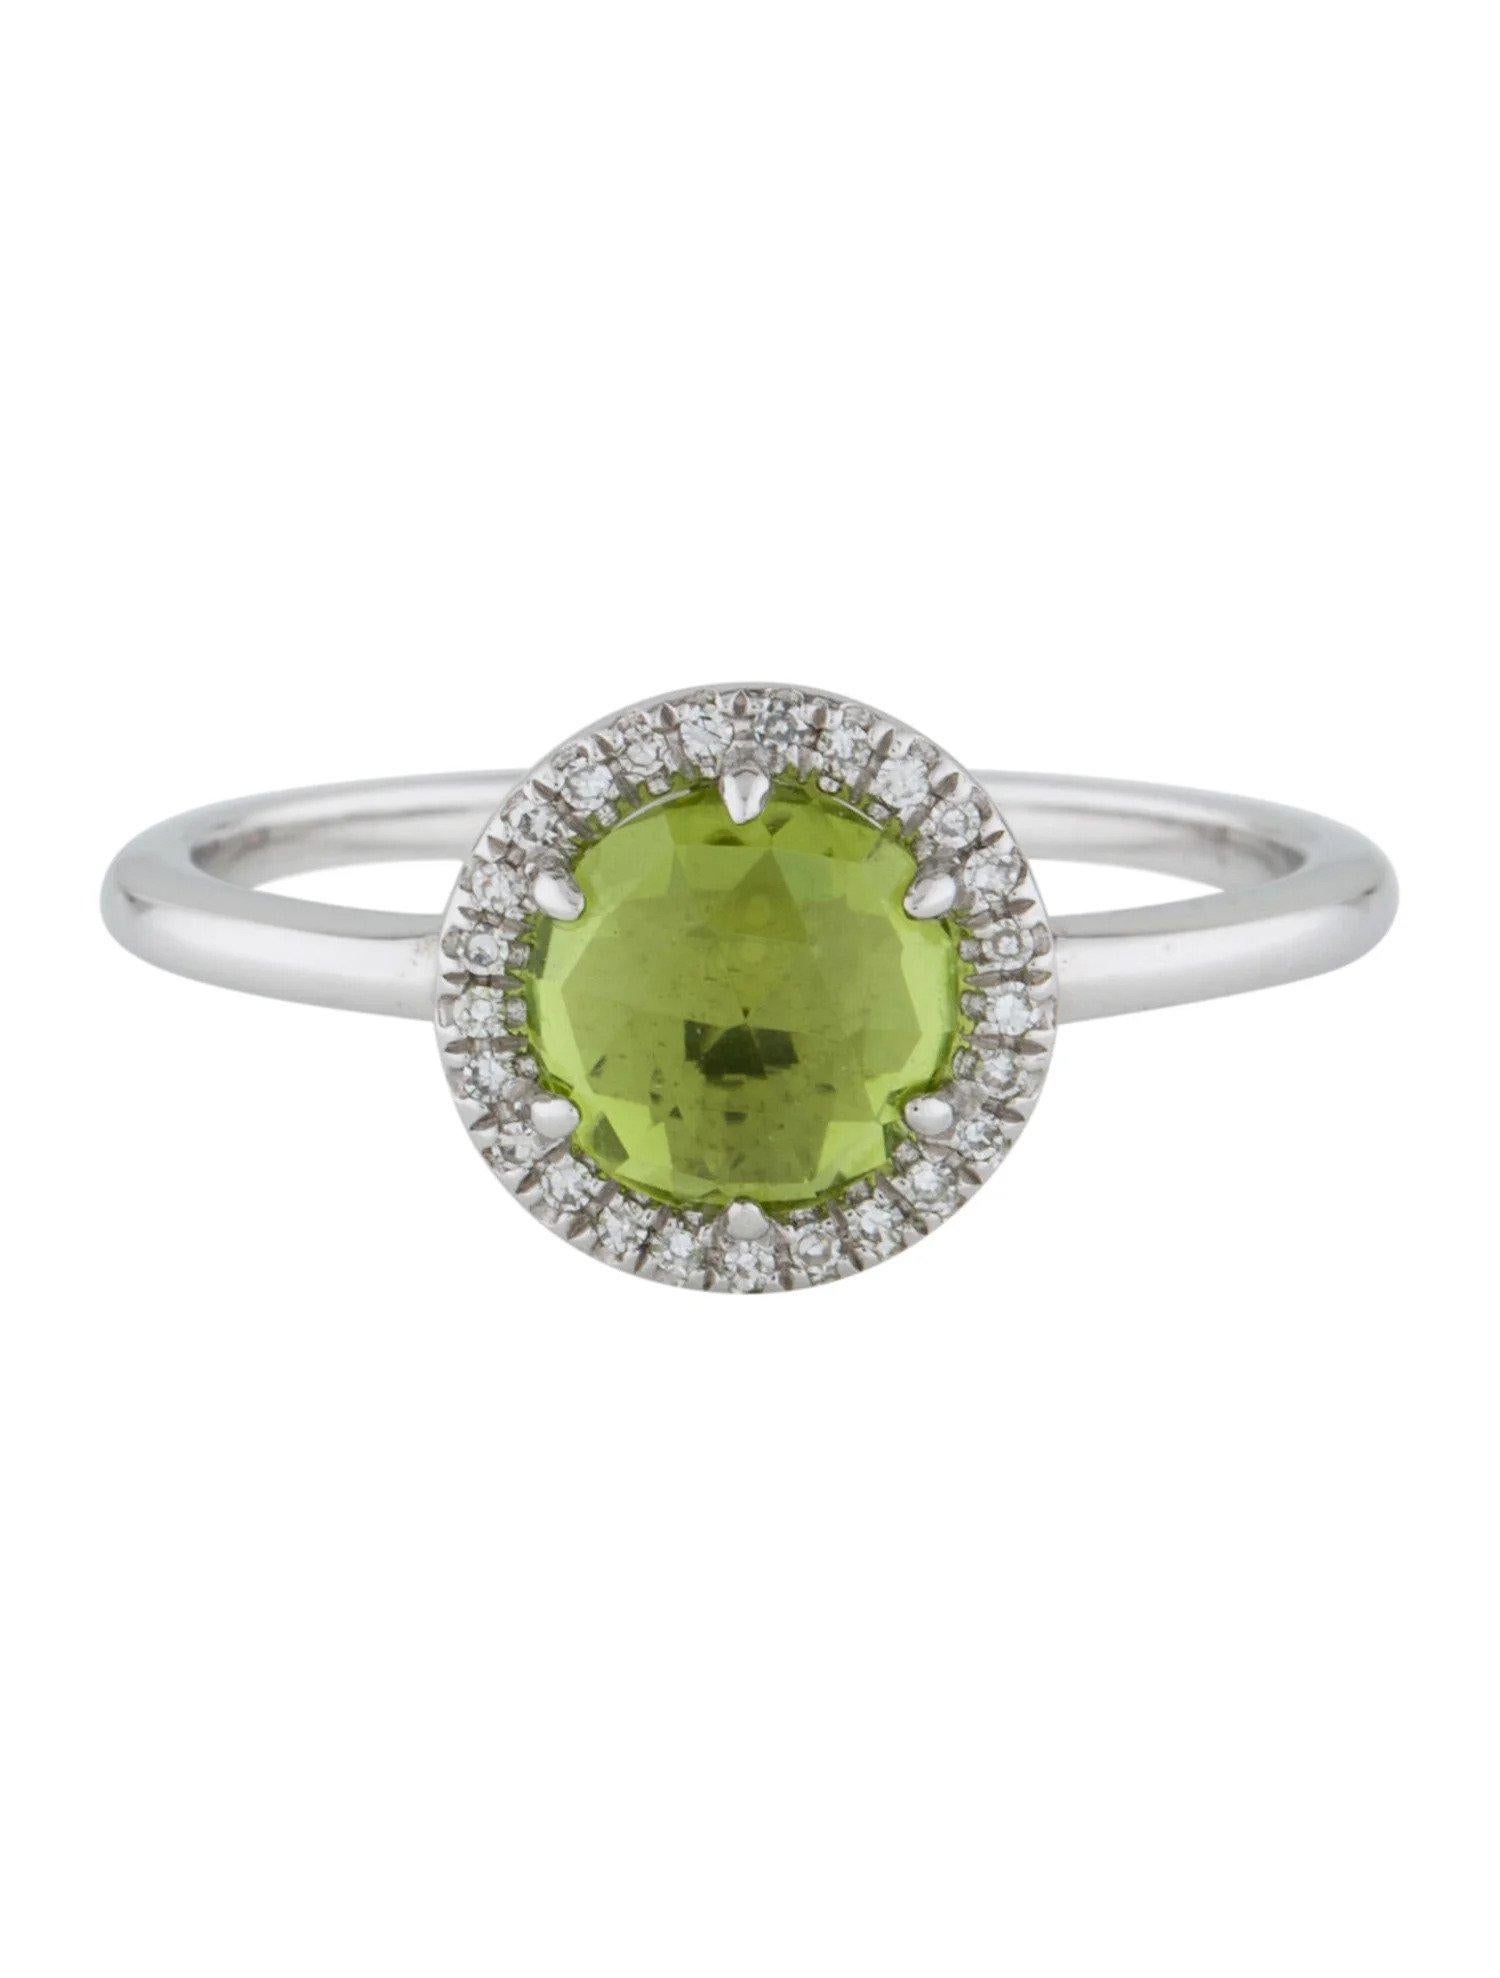 This Peridot & Diamond Ring is a stunning and timeless accessory that can add a touch of glamour and sophistication to any outfit. 

This ring features a 1.31 Carat Peridot, with a Diamond Halo comprised of 0.06 Carats of Single Cut Round White